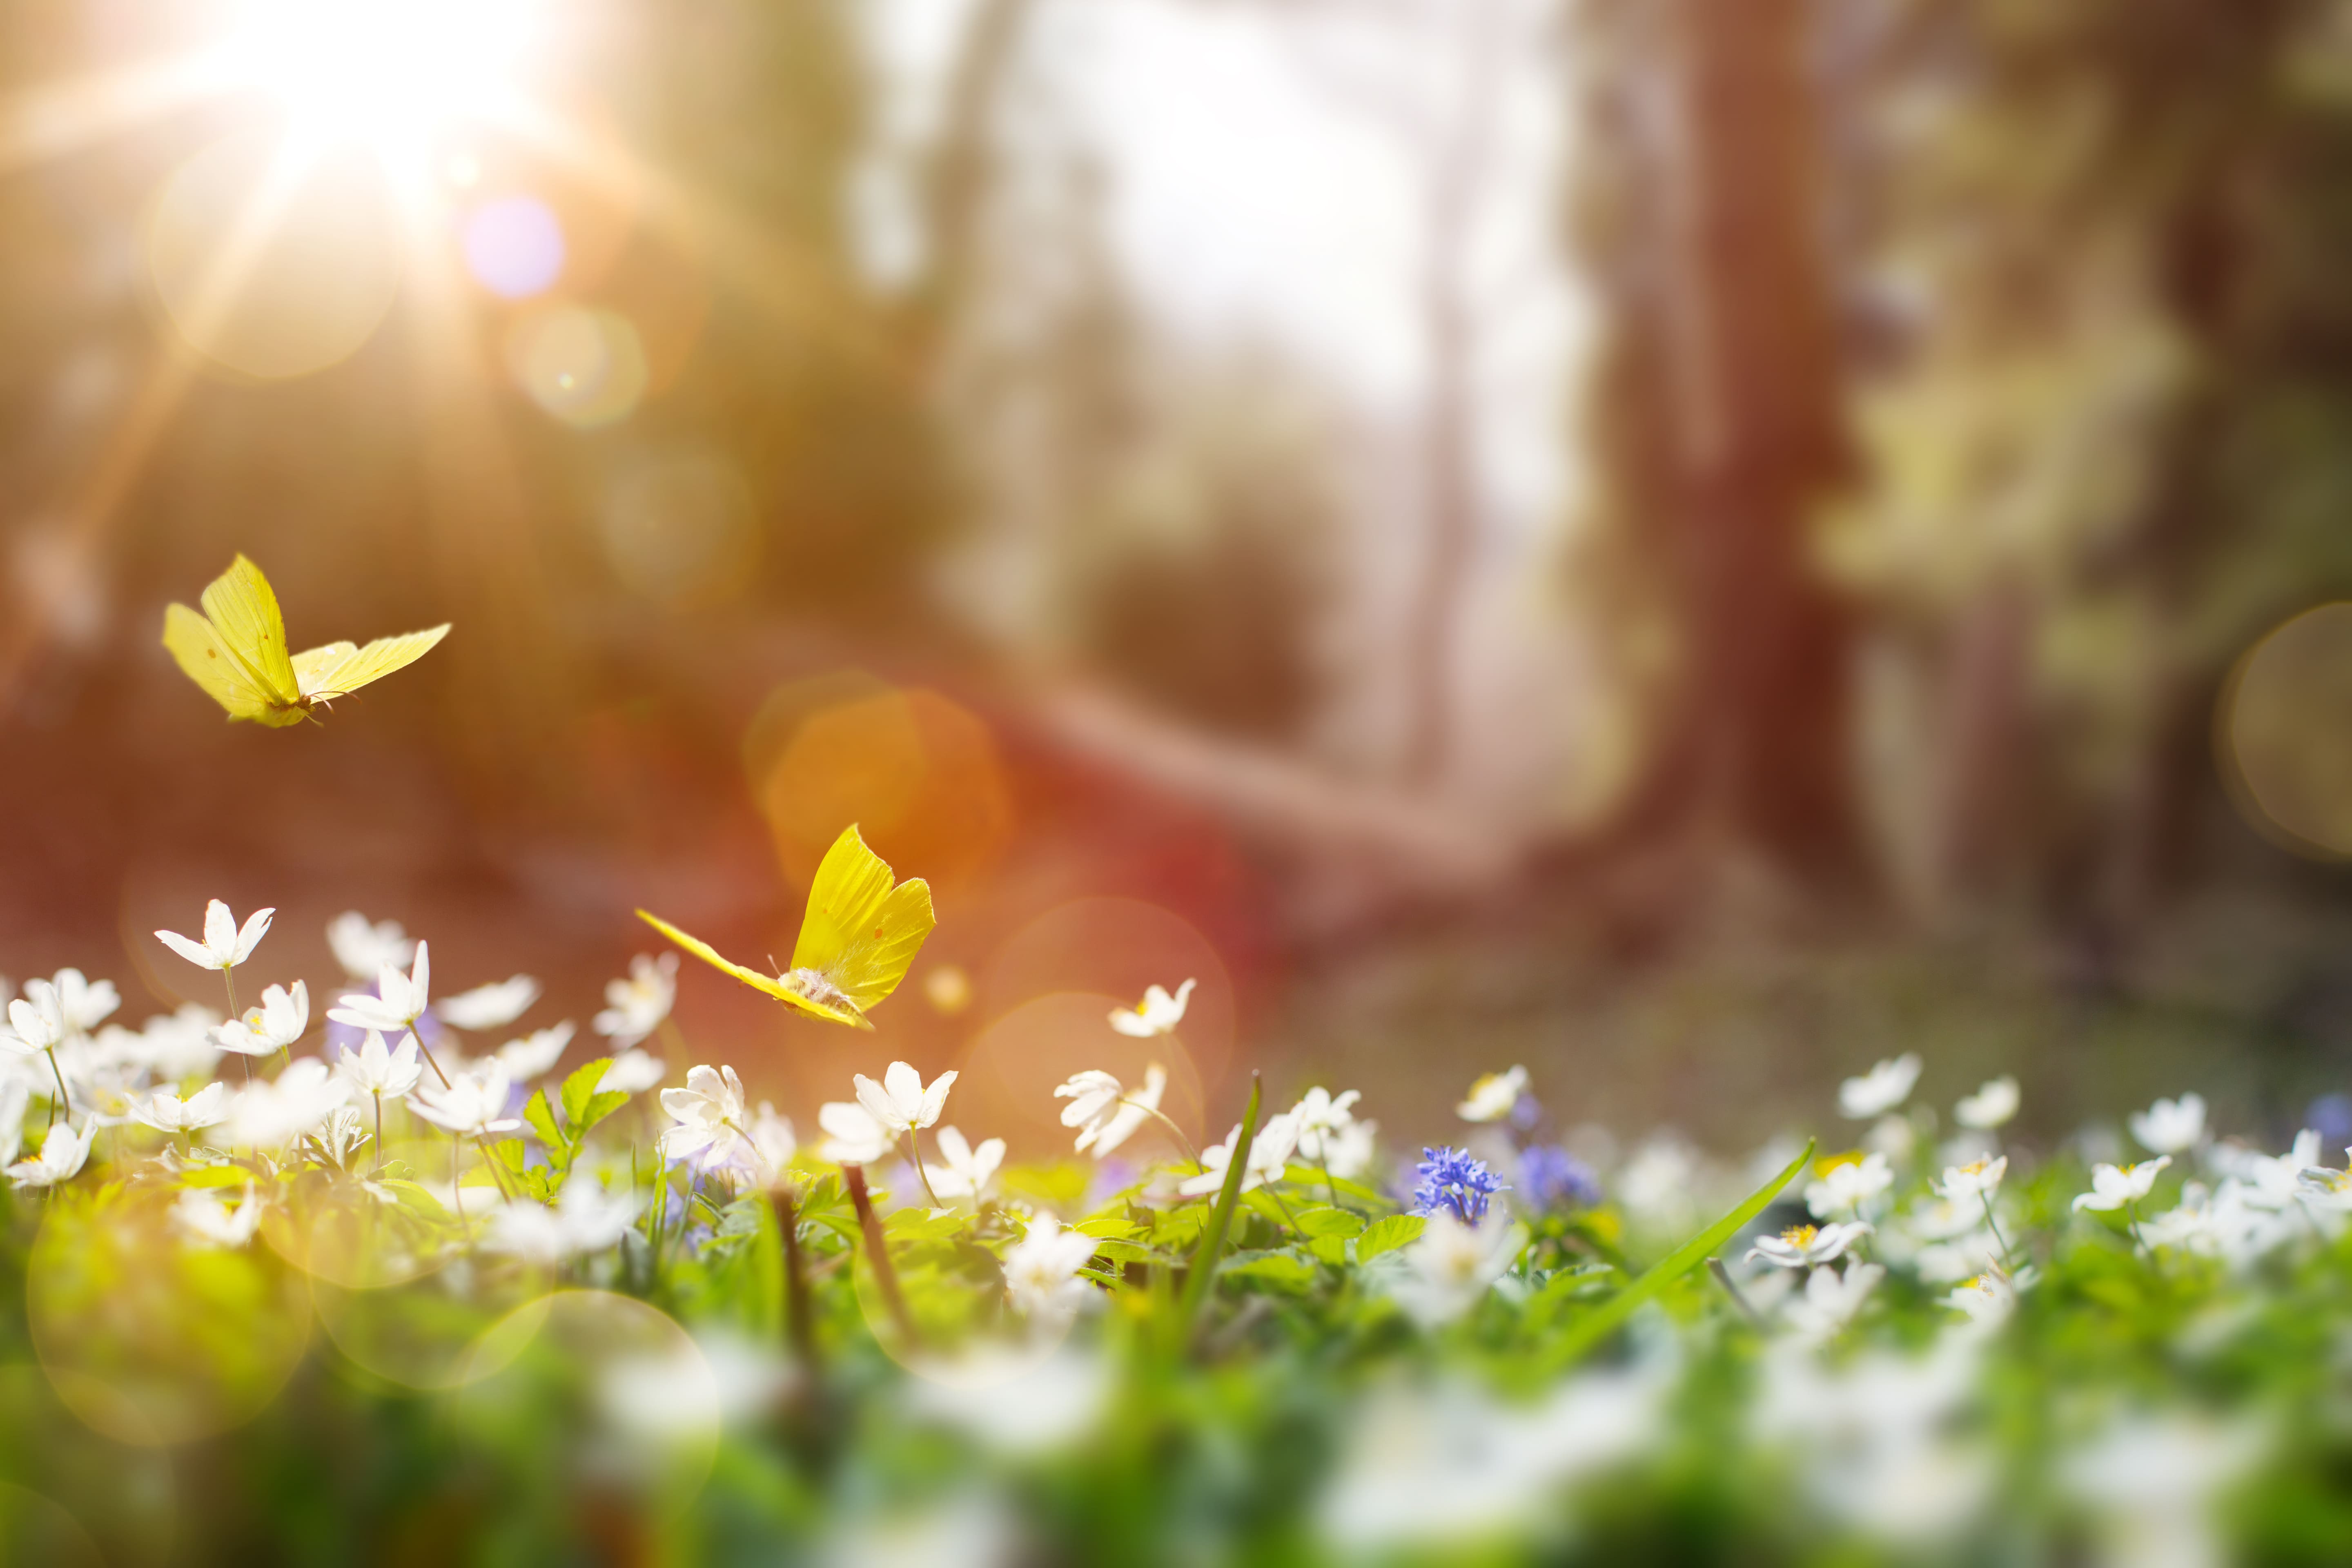 A hazy scene of spring sunshine bursting through the trees surrounded by a carpet of daisies and wild flowers. Two butterflies are dancing just above the flowers.